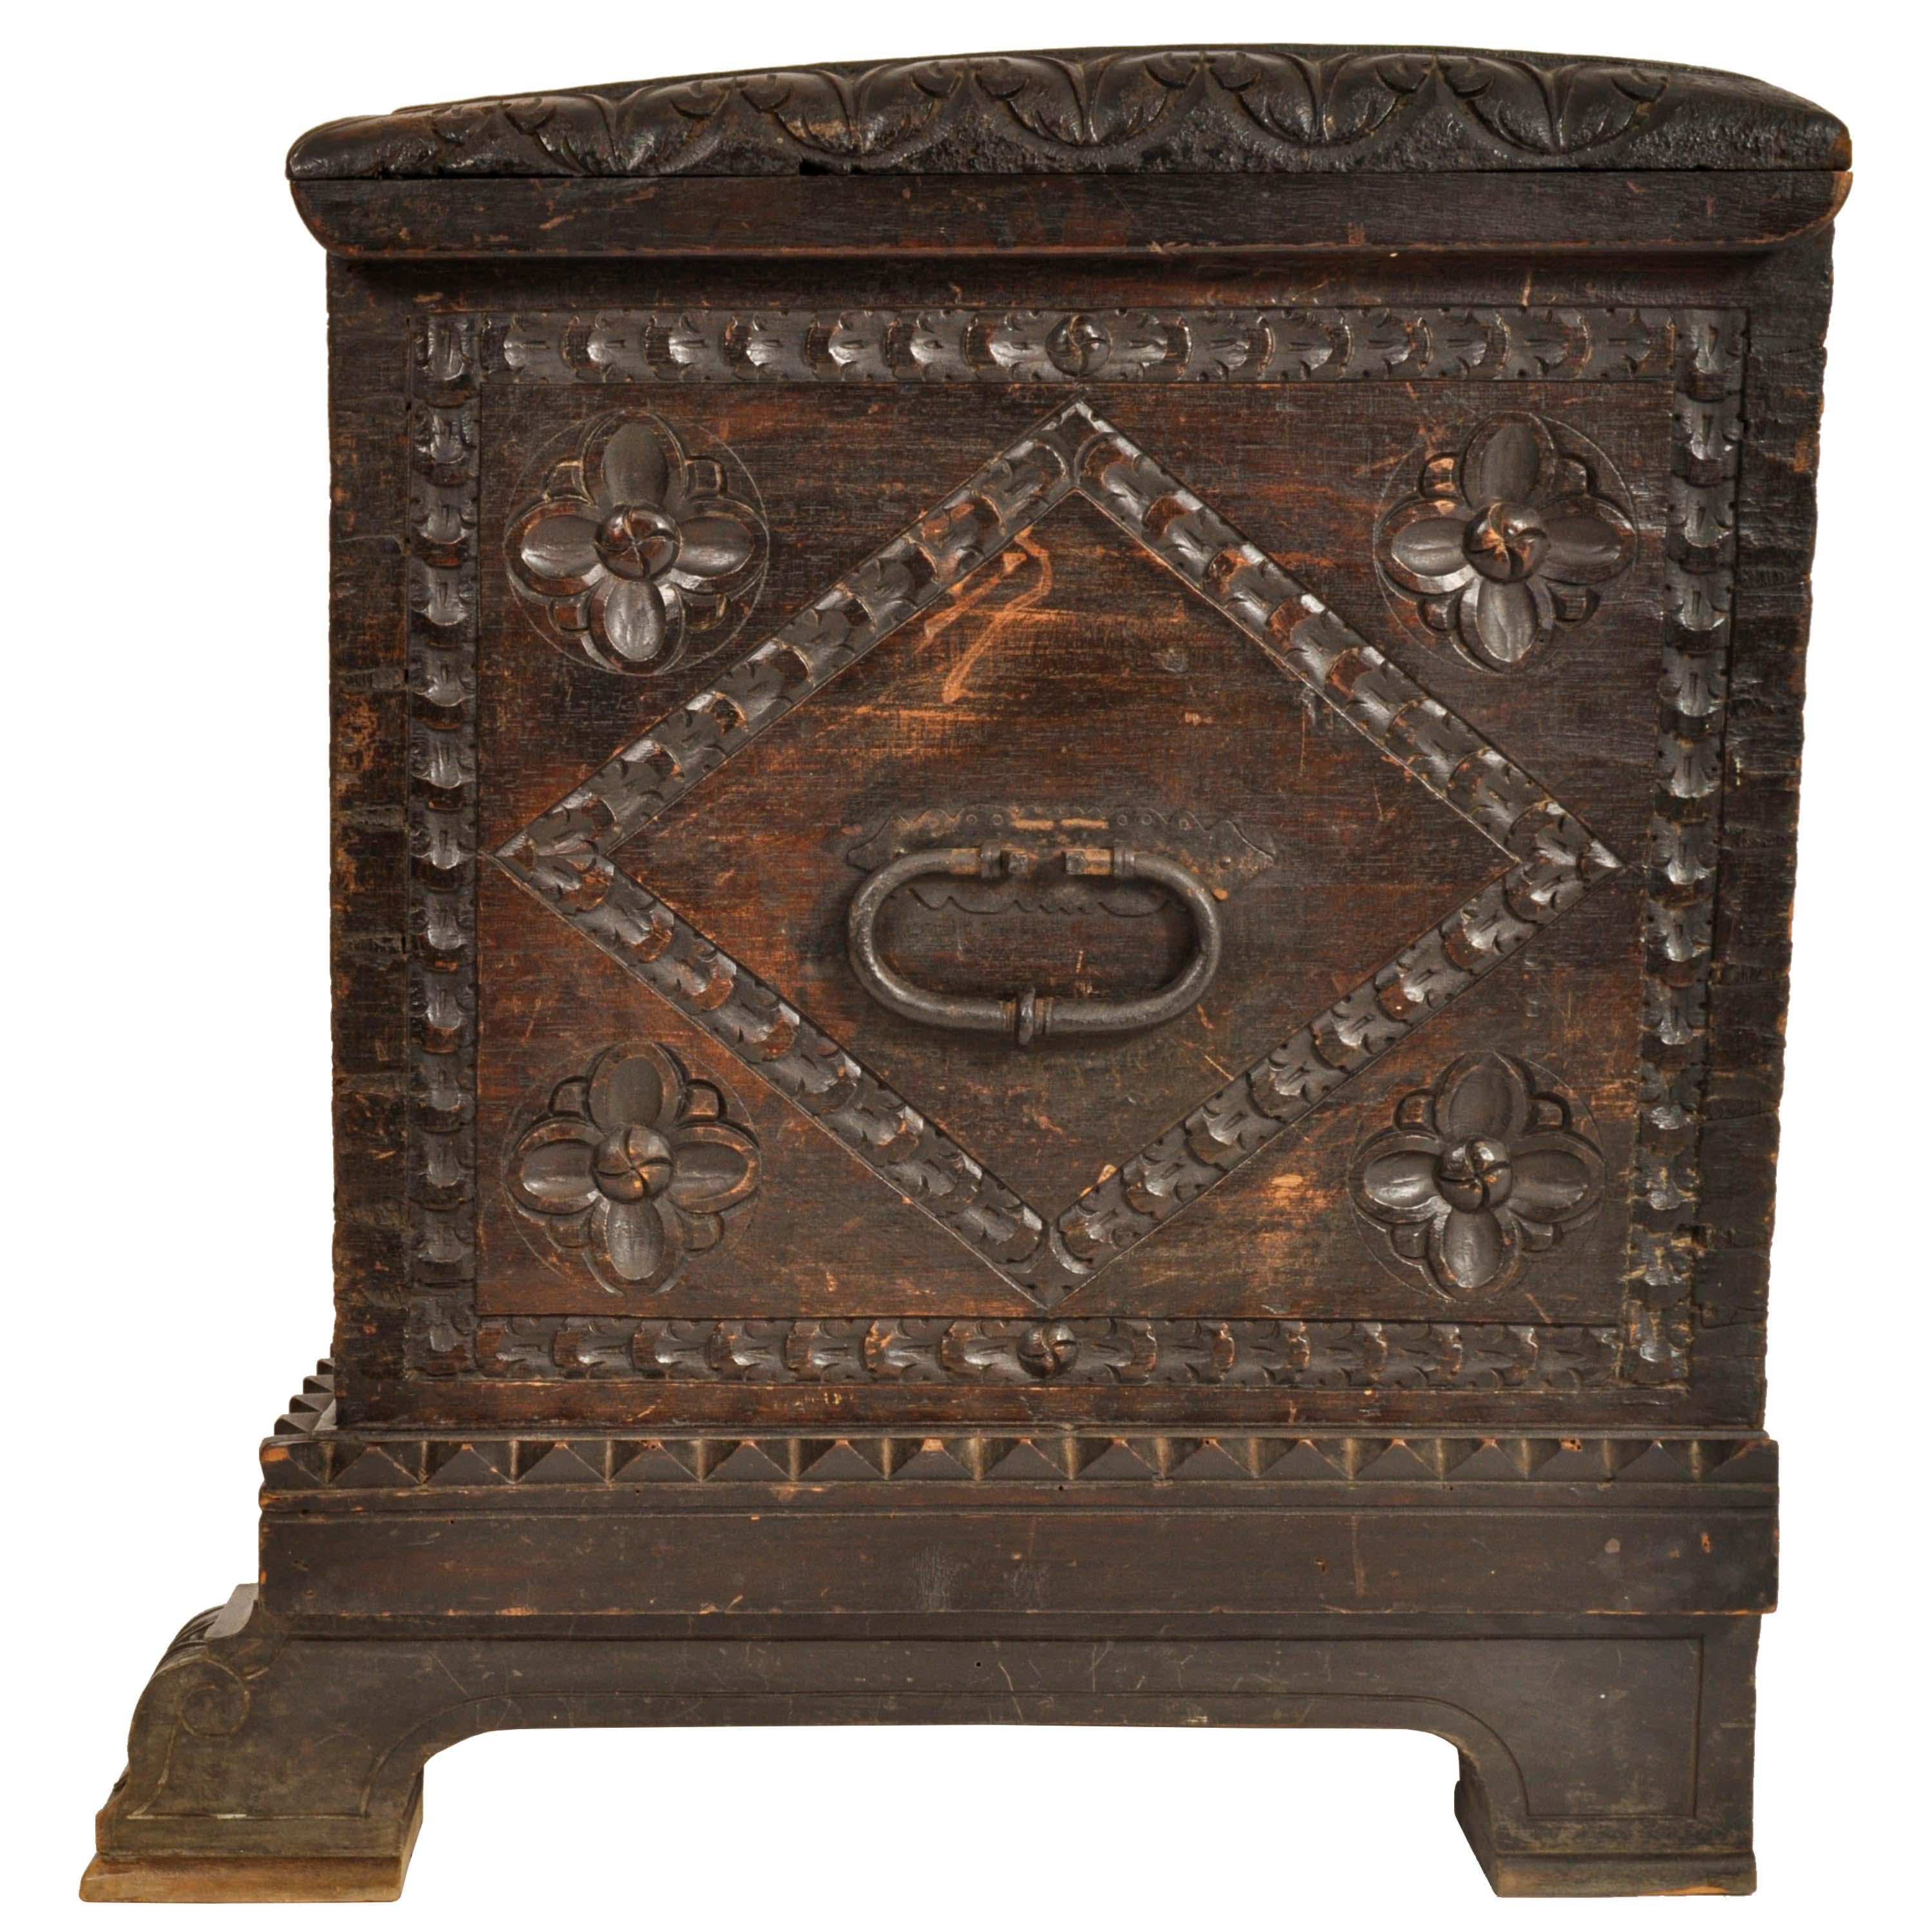 Antique Scandinavian Pine Baroque Folk Art Carved Dowry Chest Trunk Coffer 1780 For Sale 9